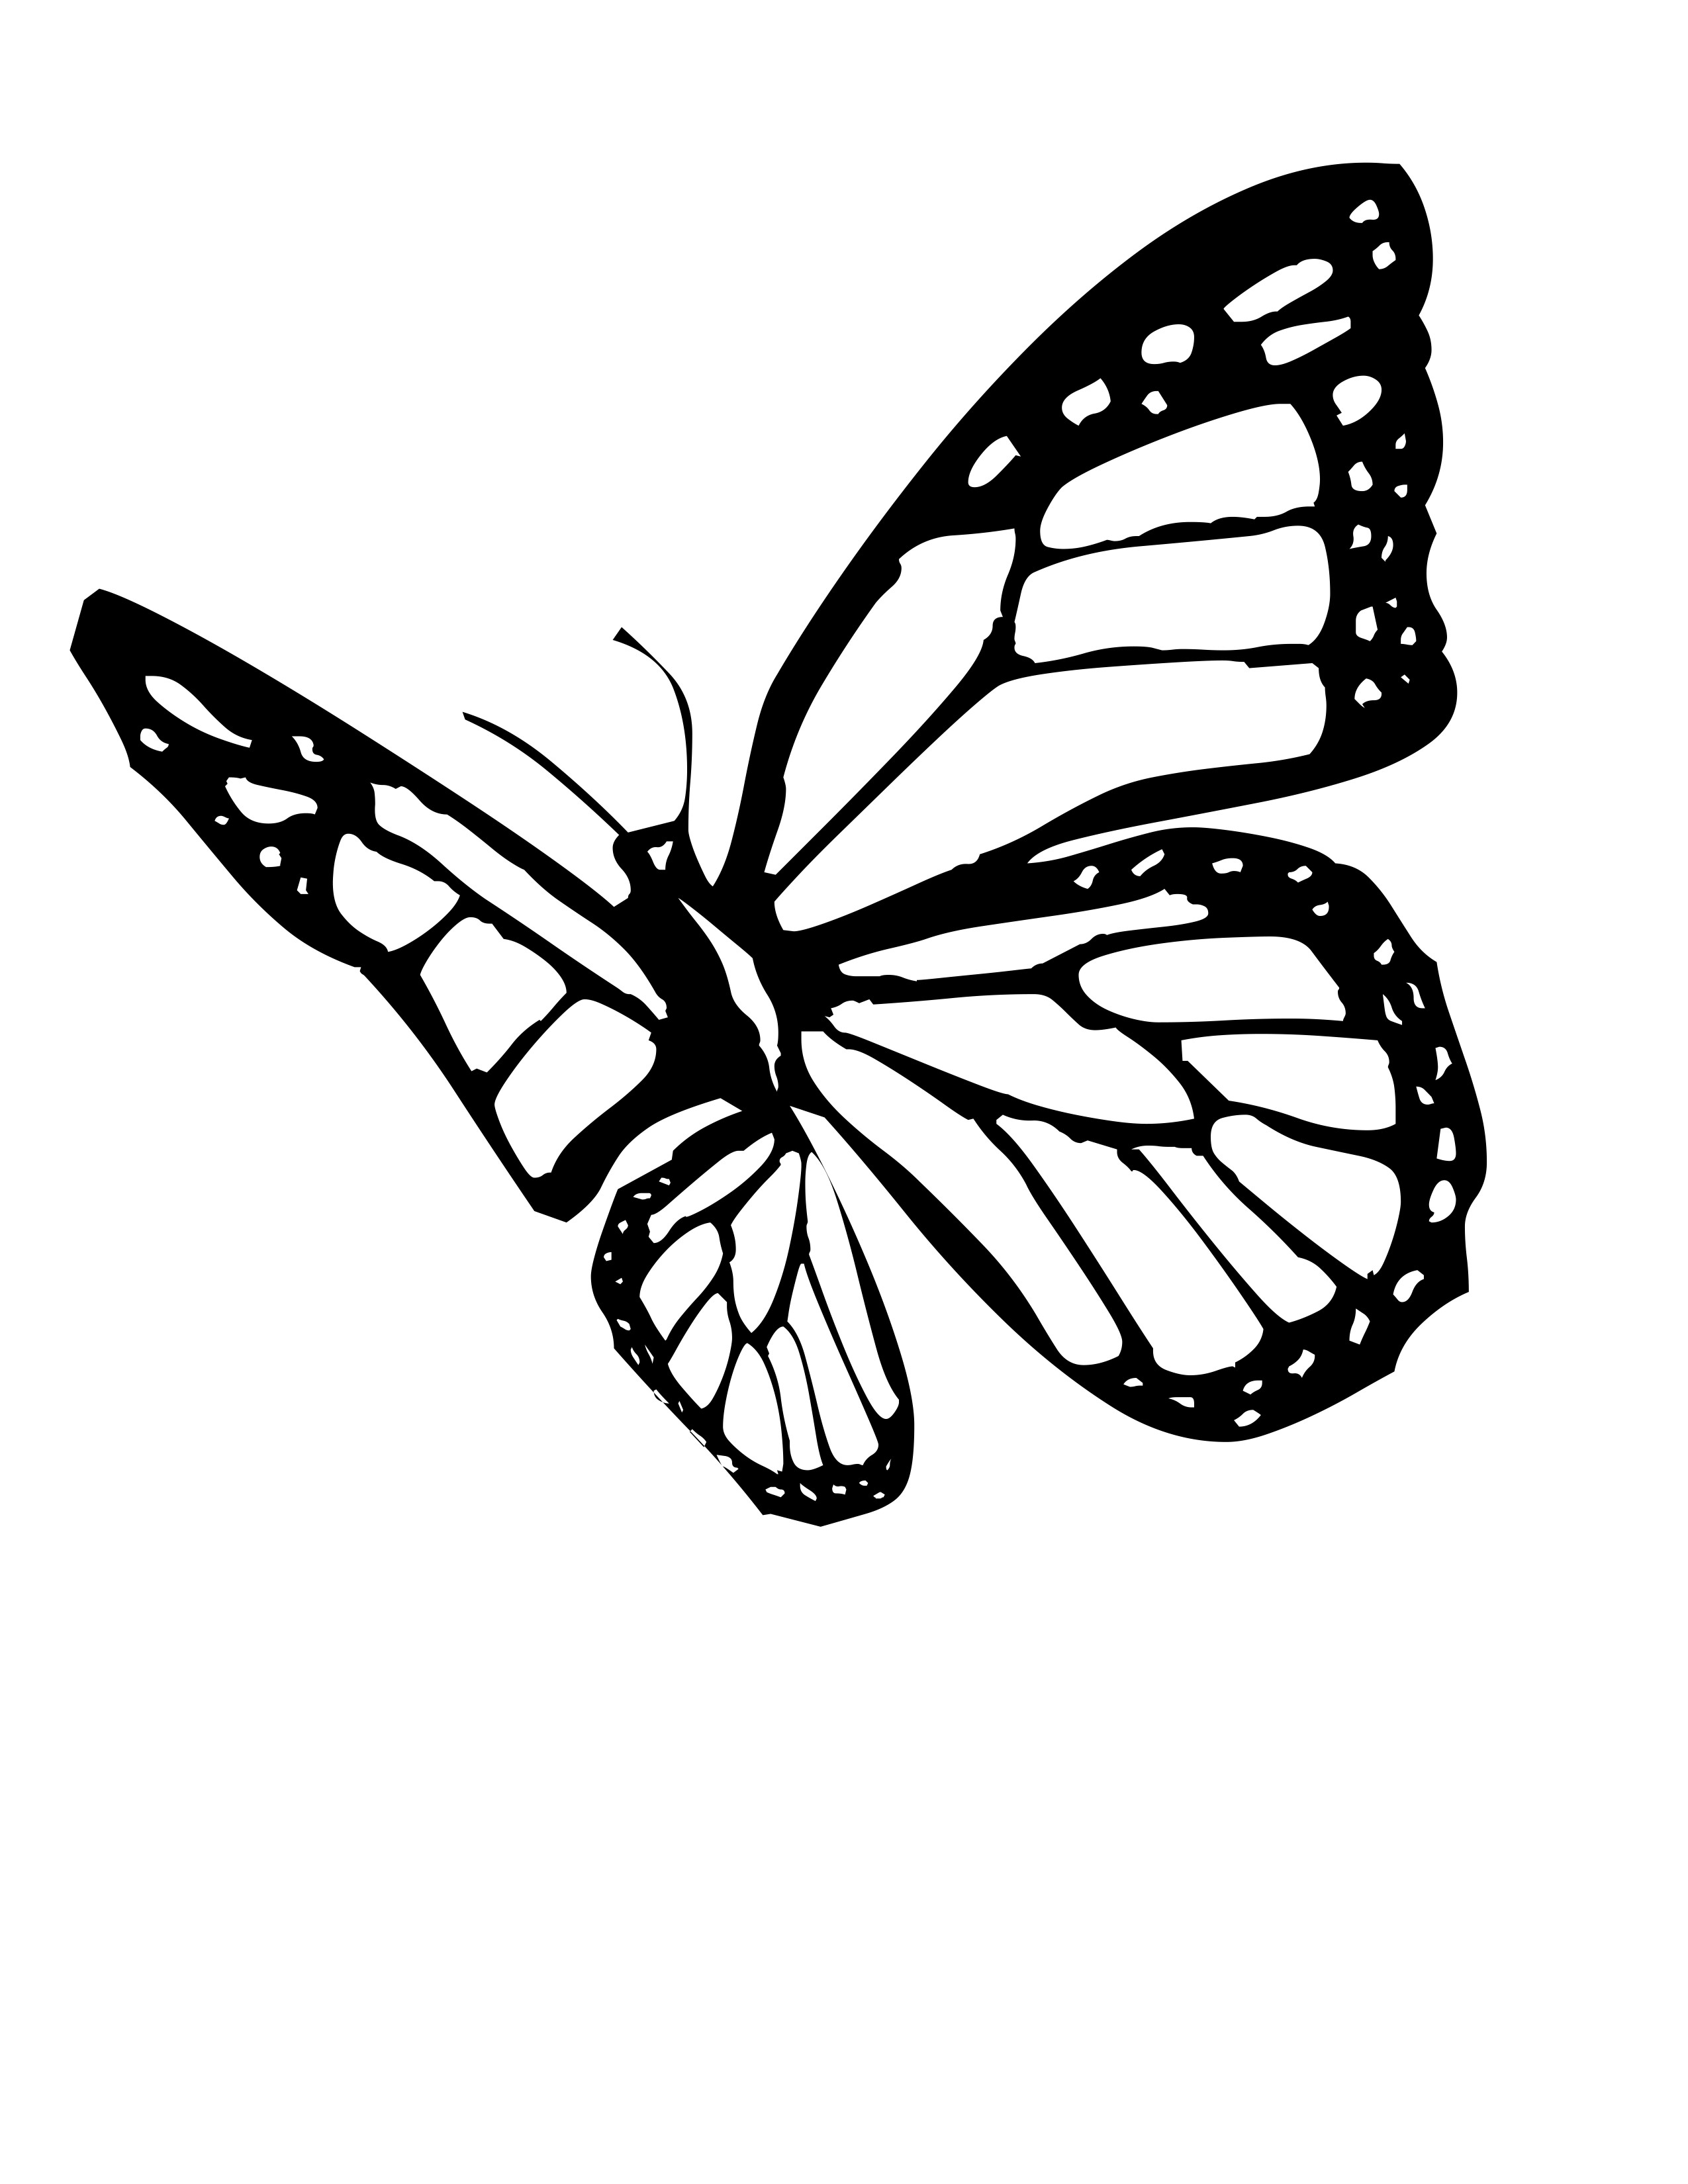 1000+ images about black monarch butterfly tattoos